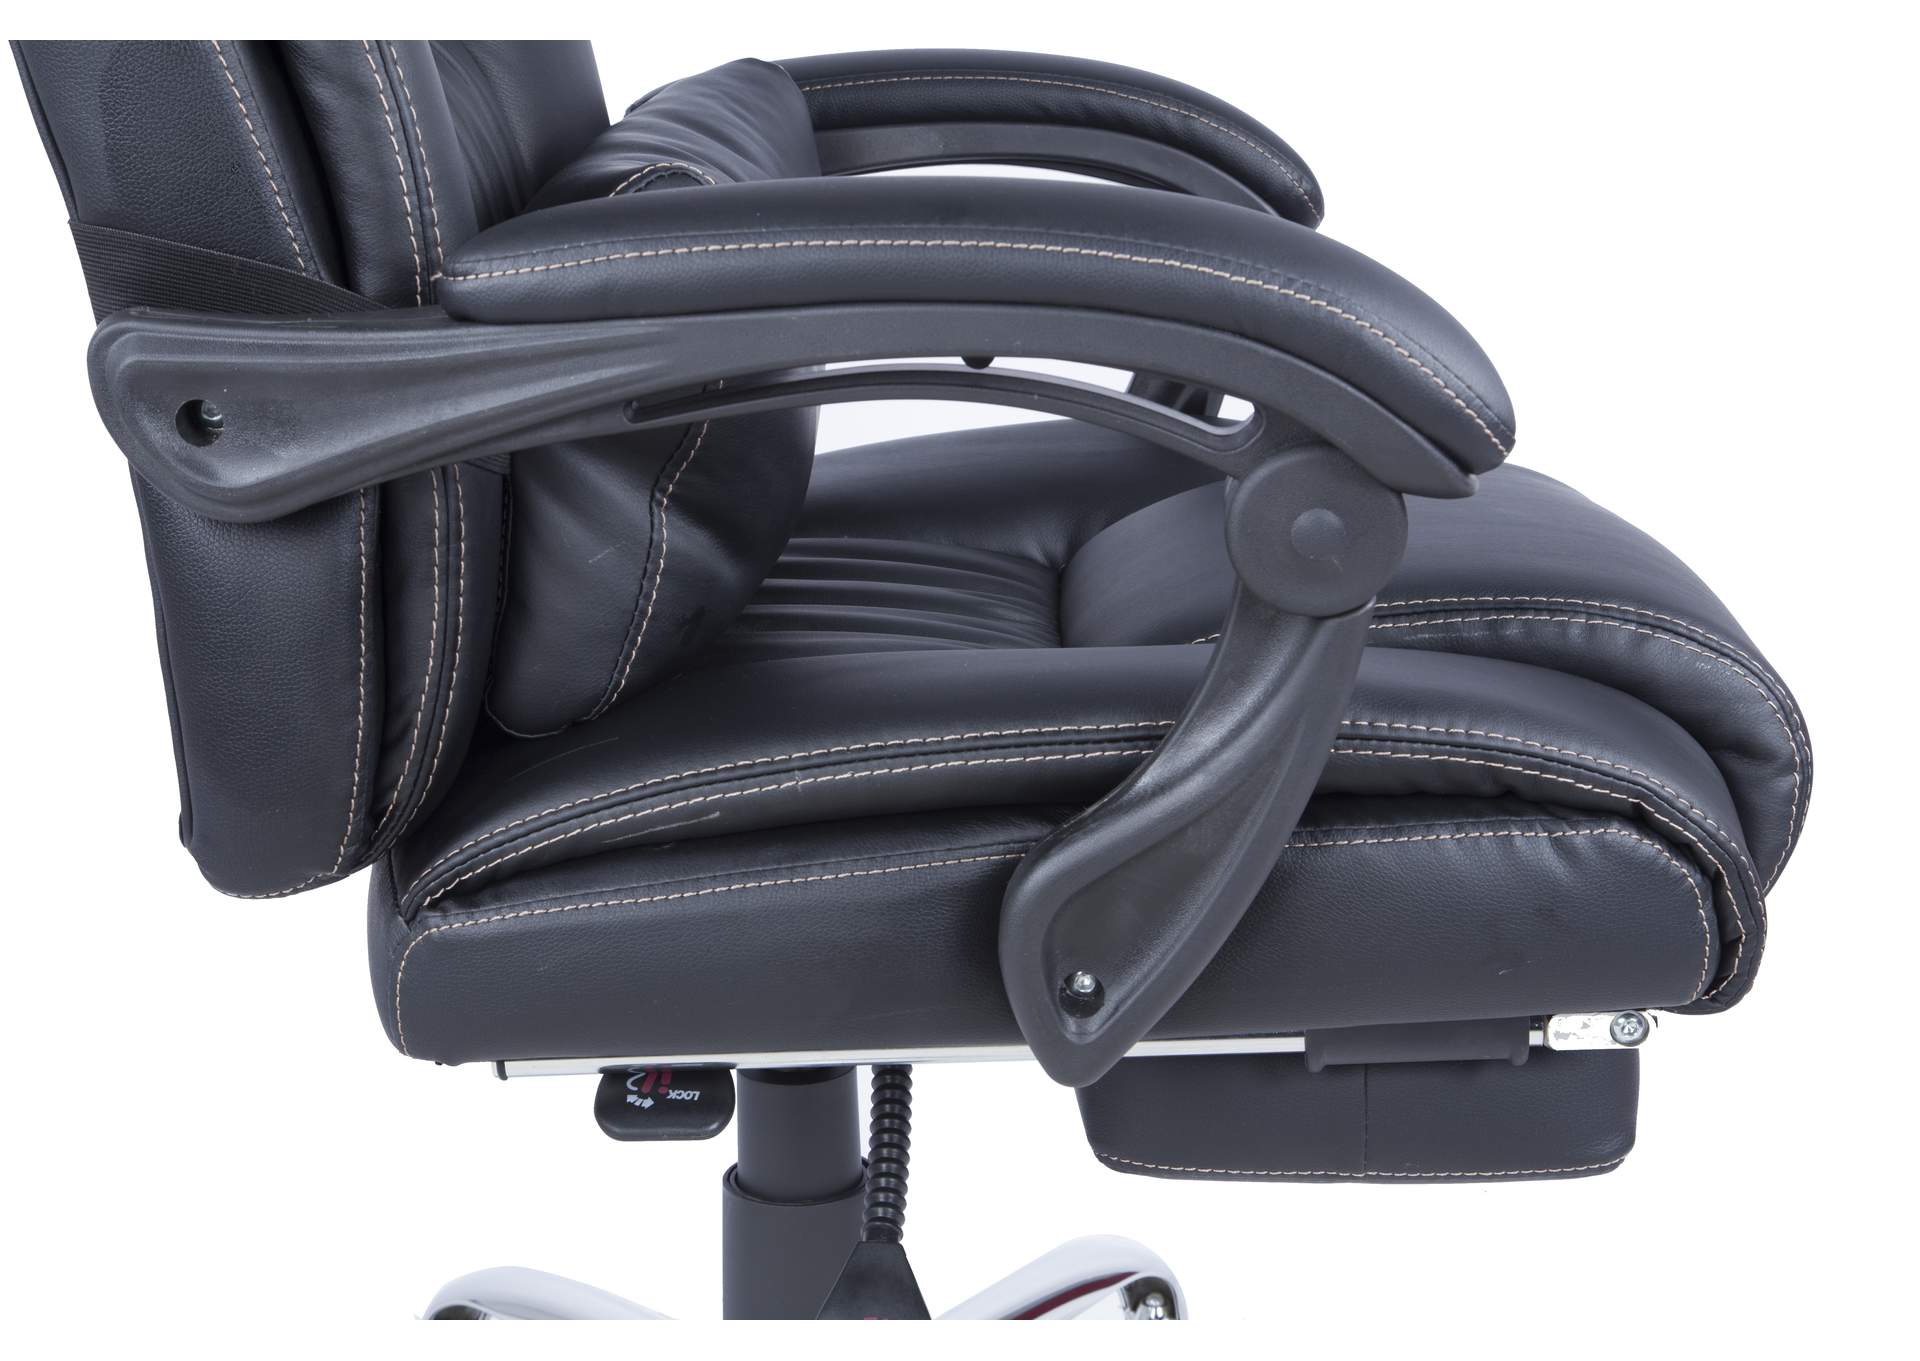 Modern Ergonomic Computer Chair With Extendable Footrest,Chintaly Imports